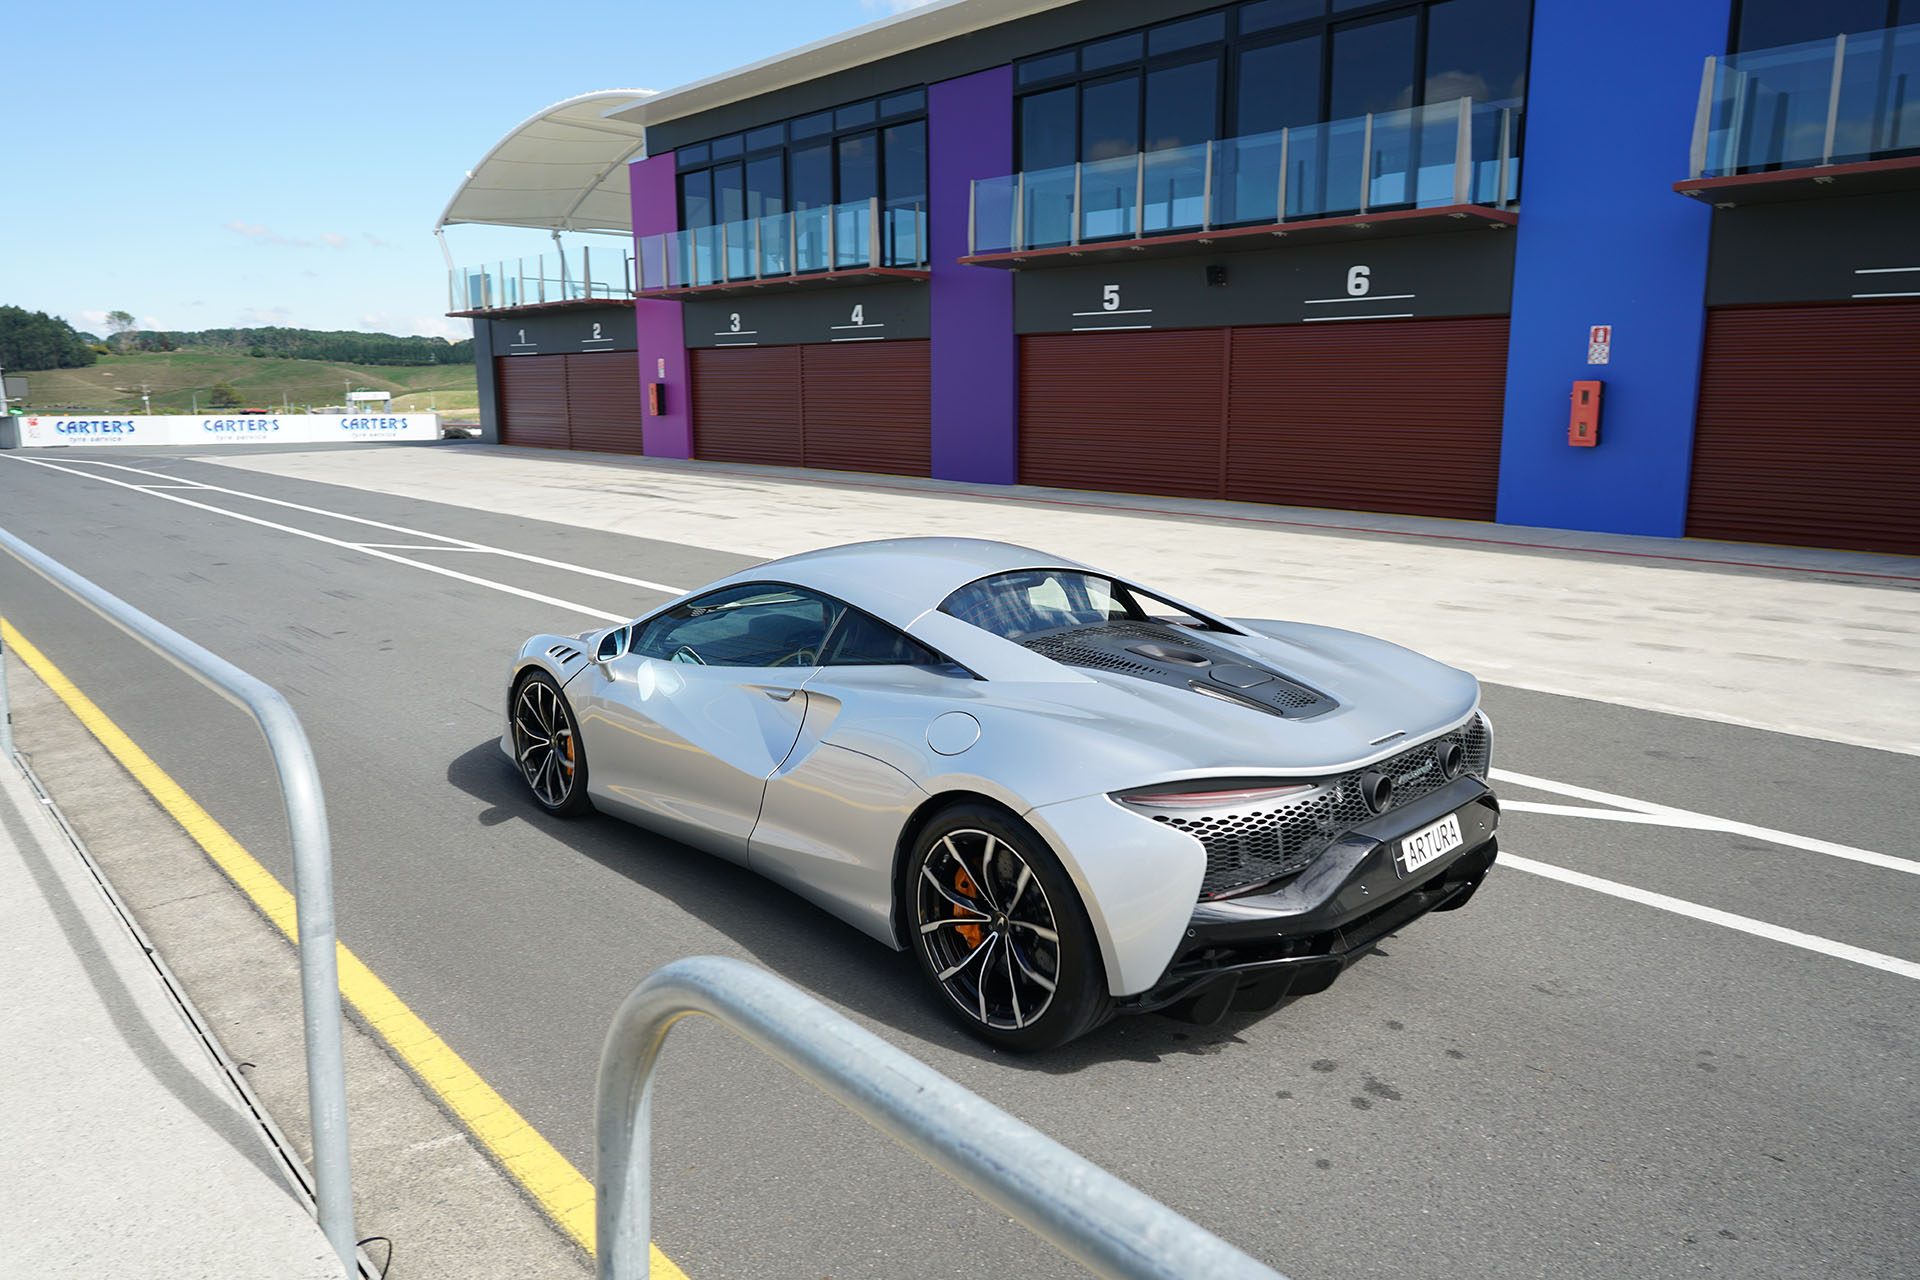 McLaren Artura makes its way silently to the start line under electric power only.